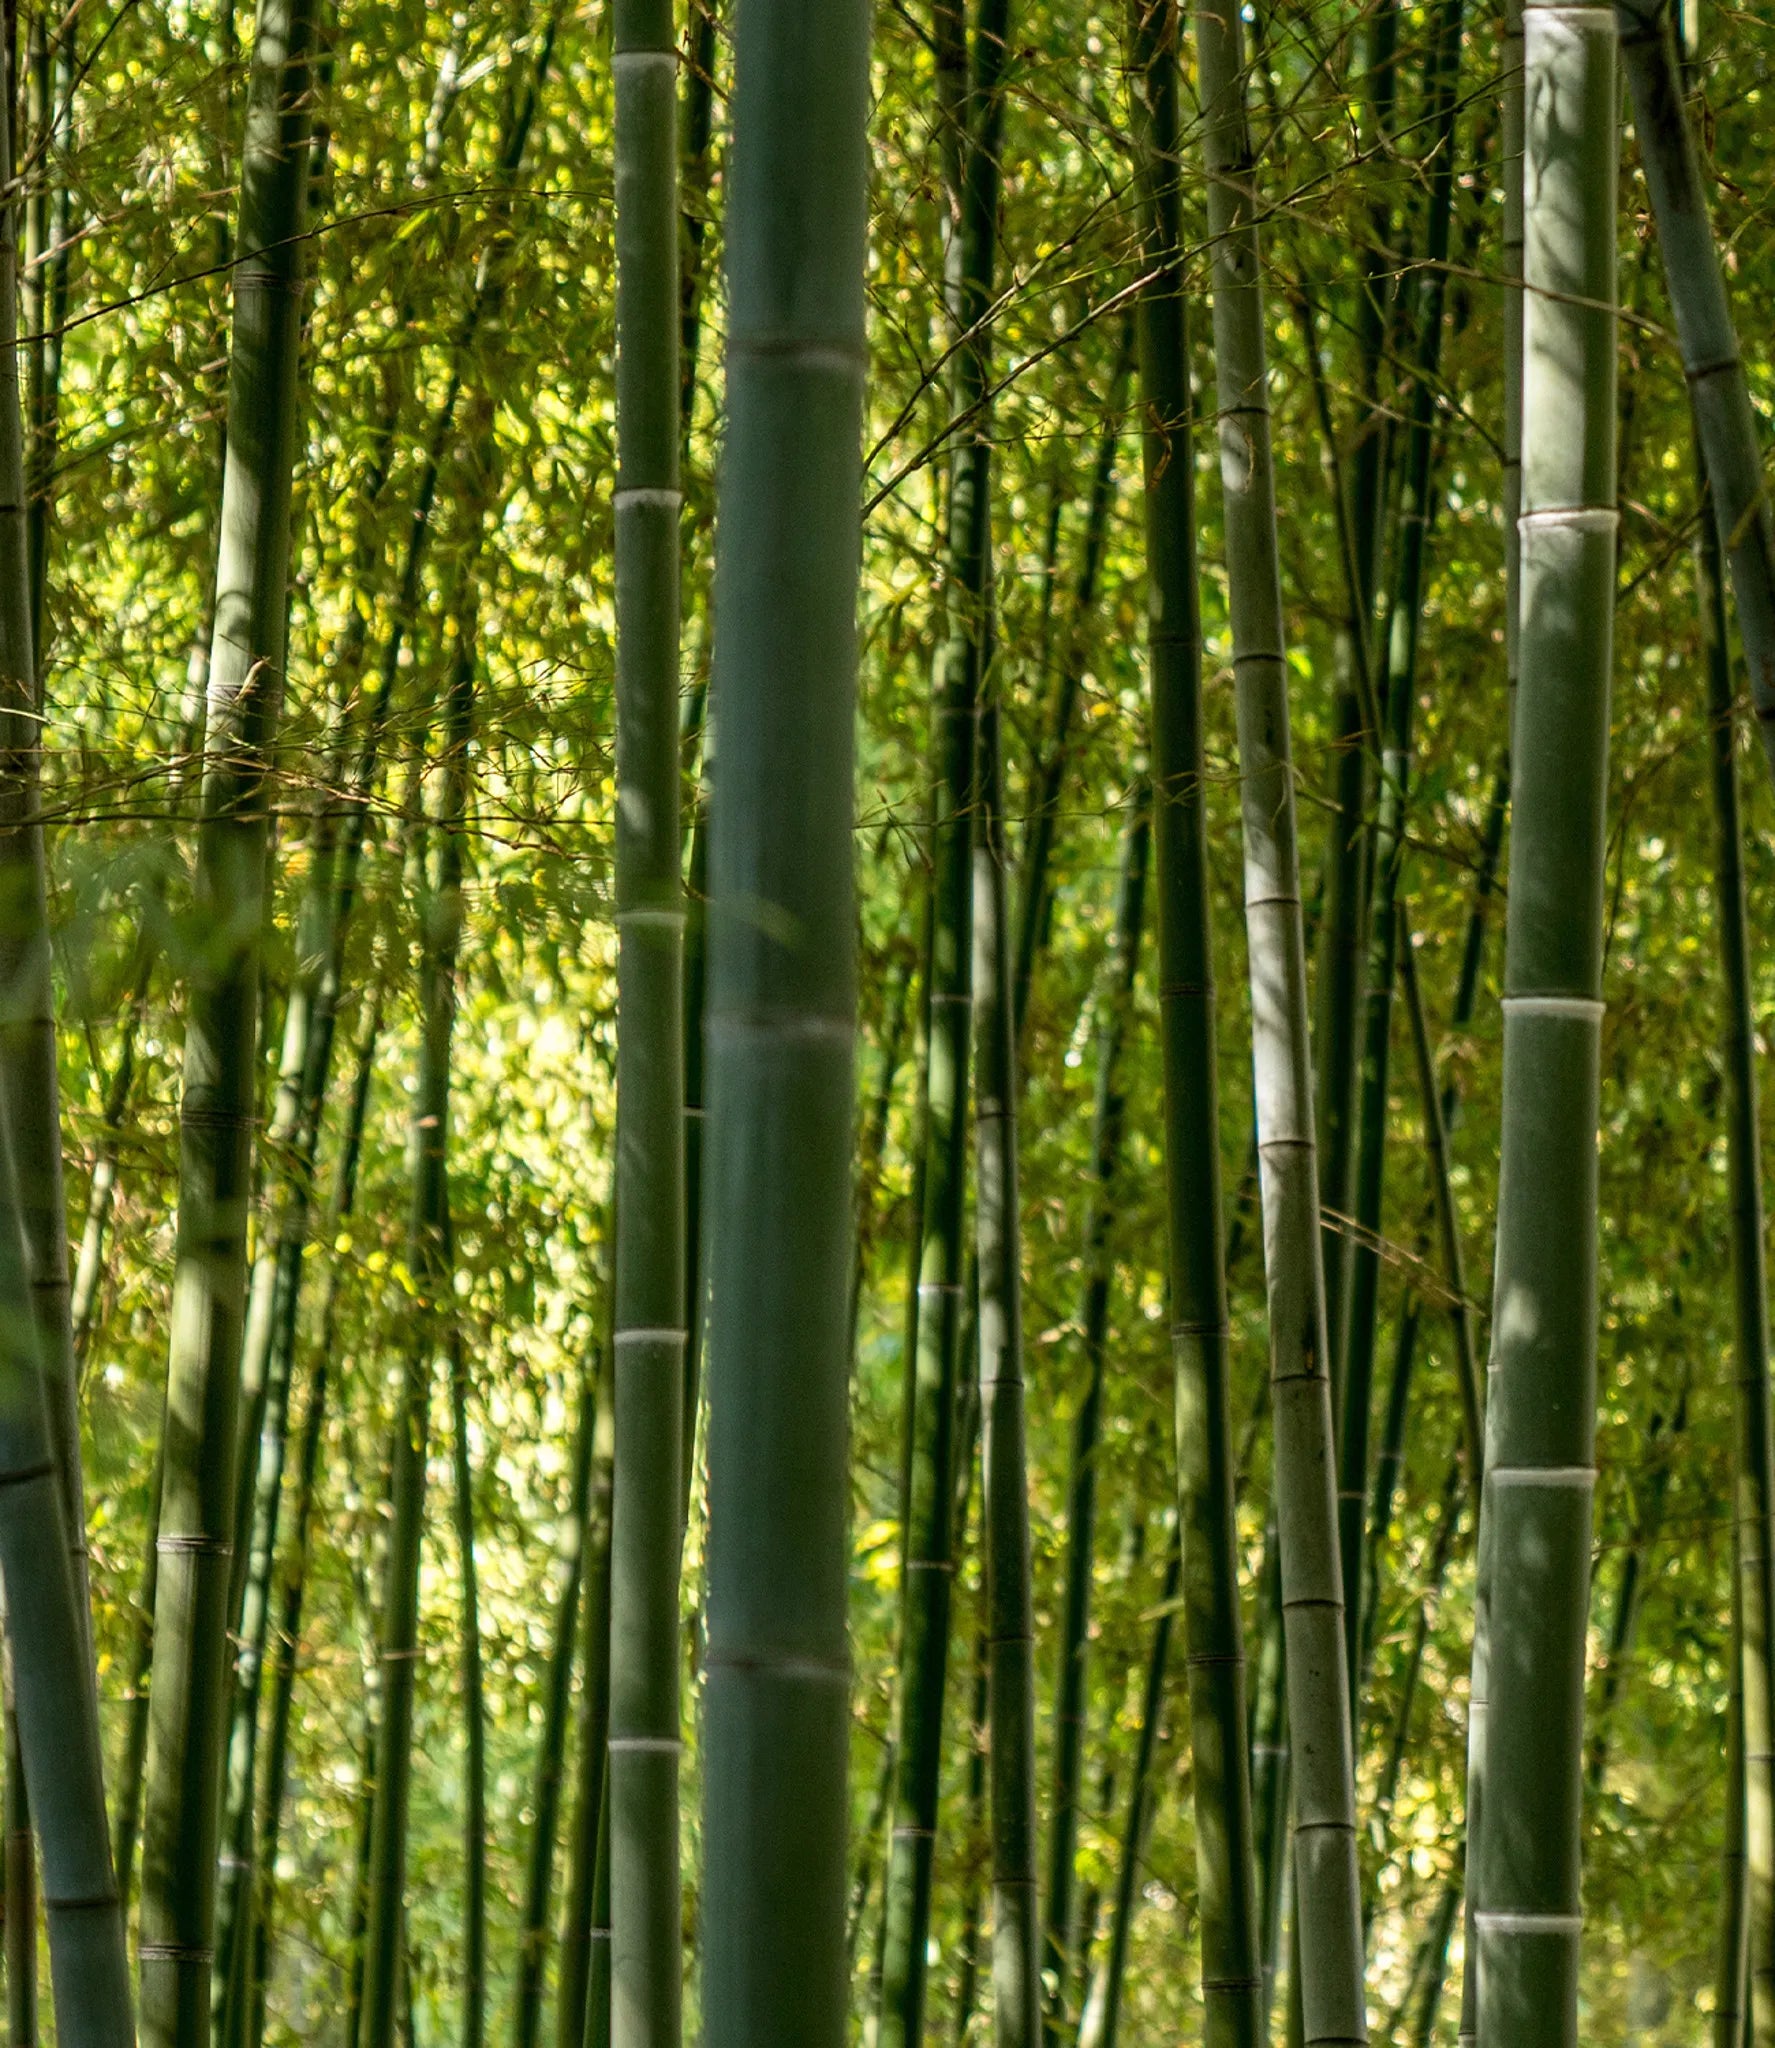 Seek Bamboo - How Does Bamboo Grow So Fast